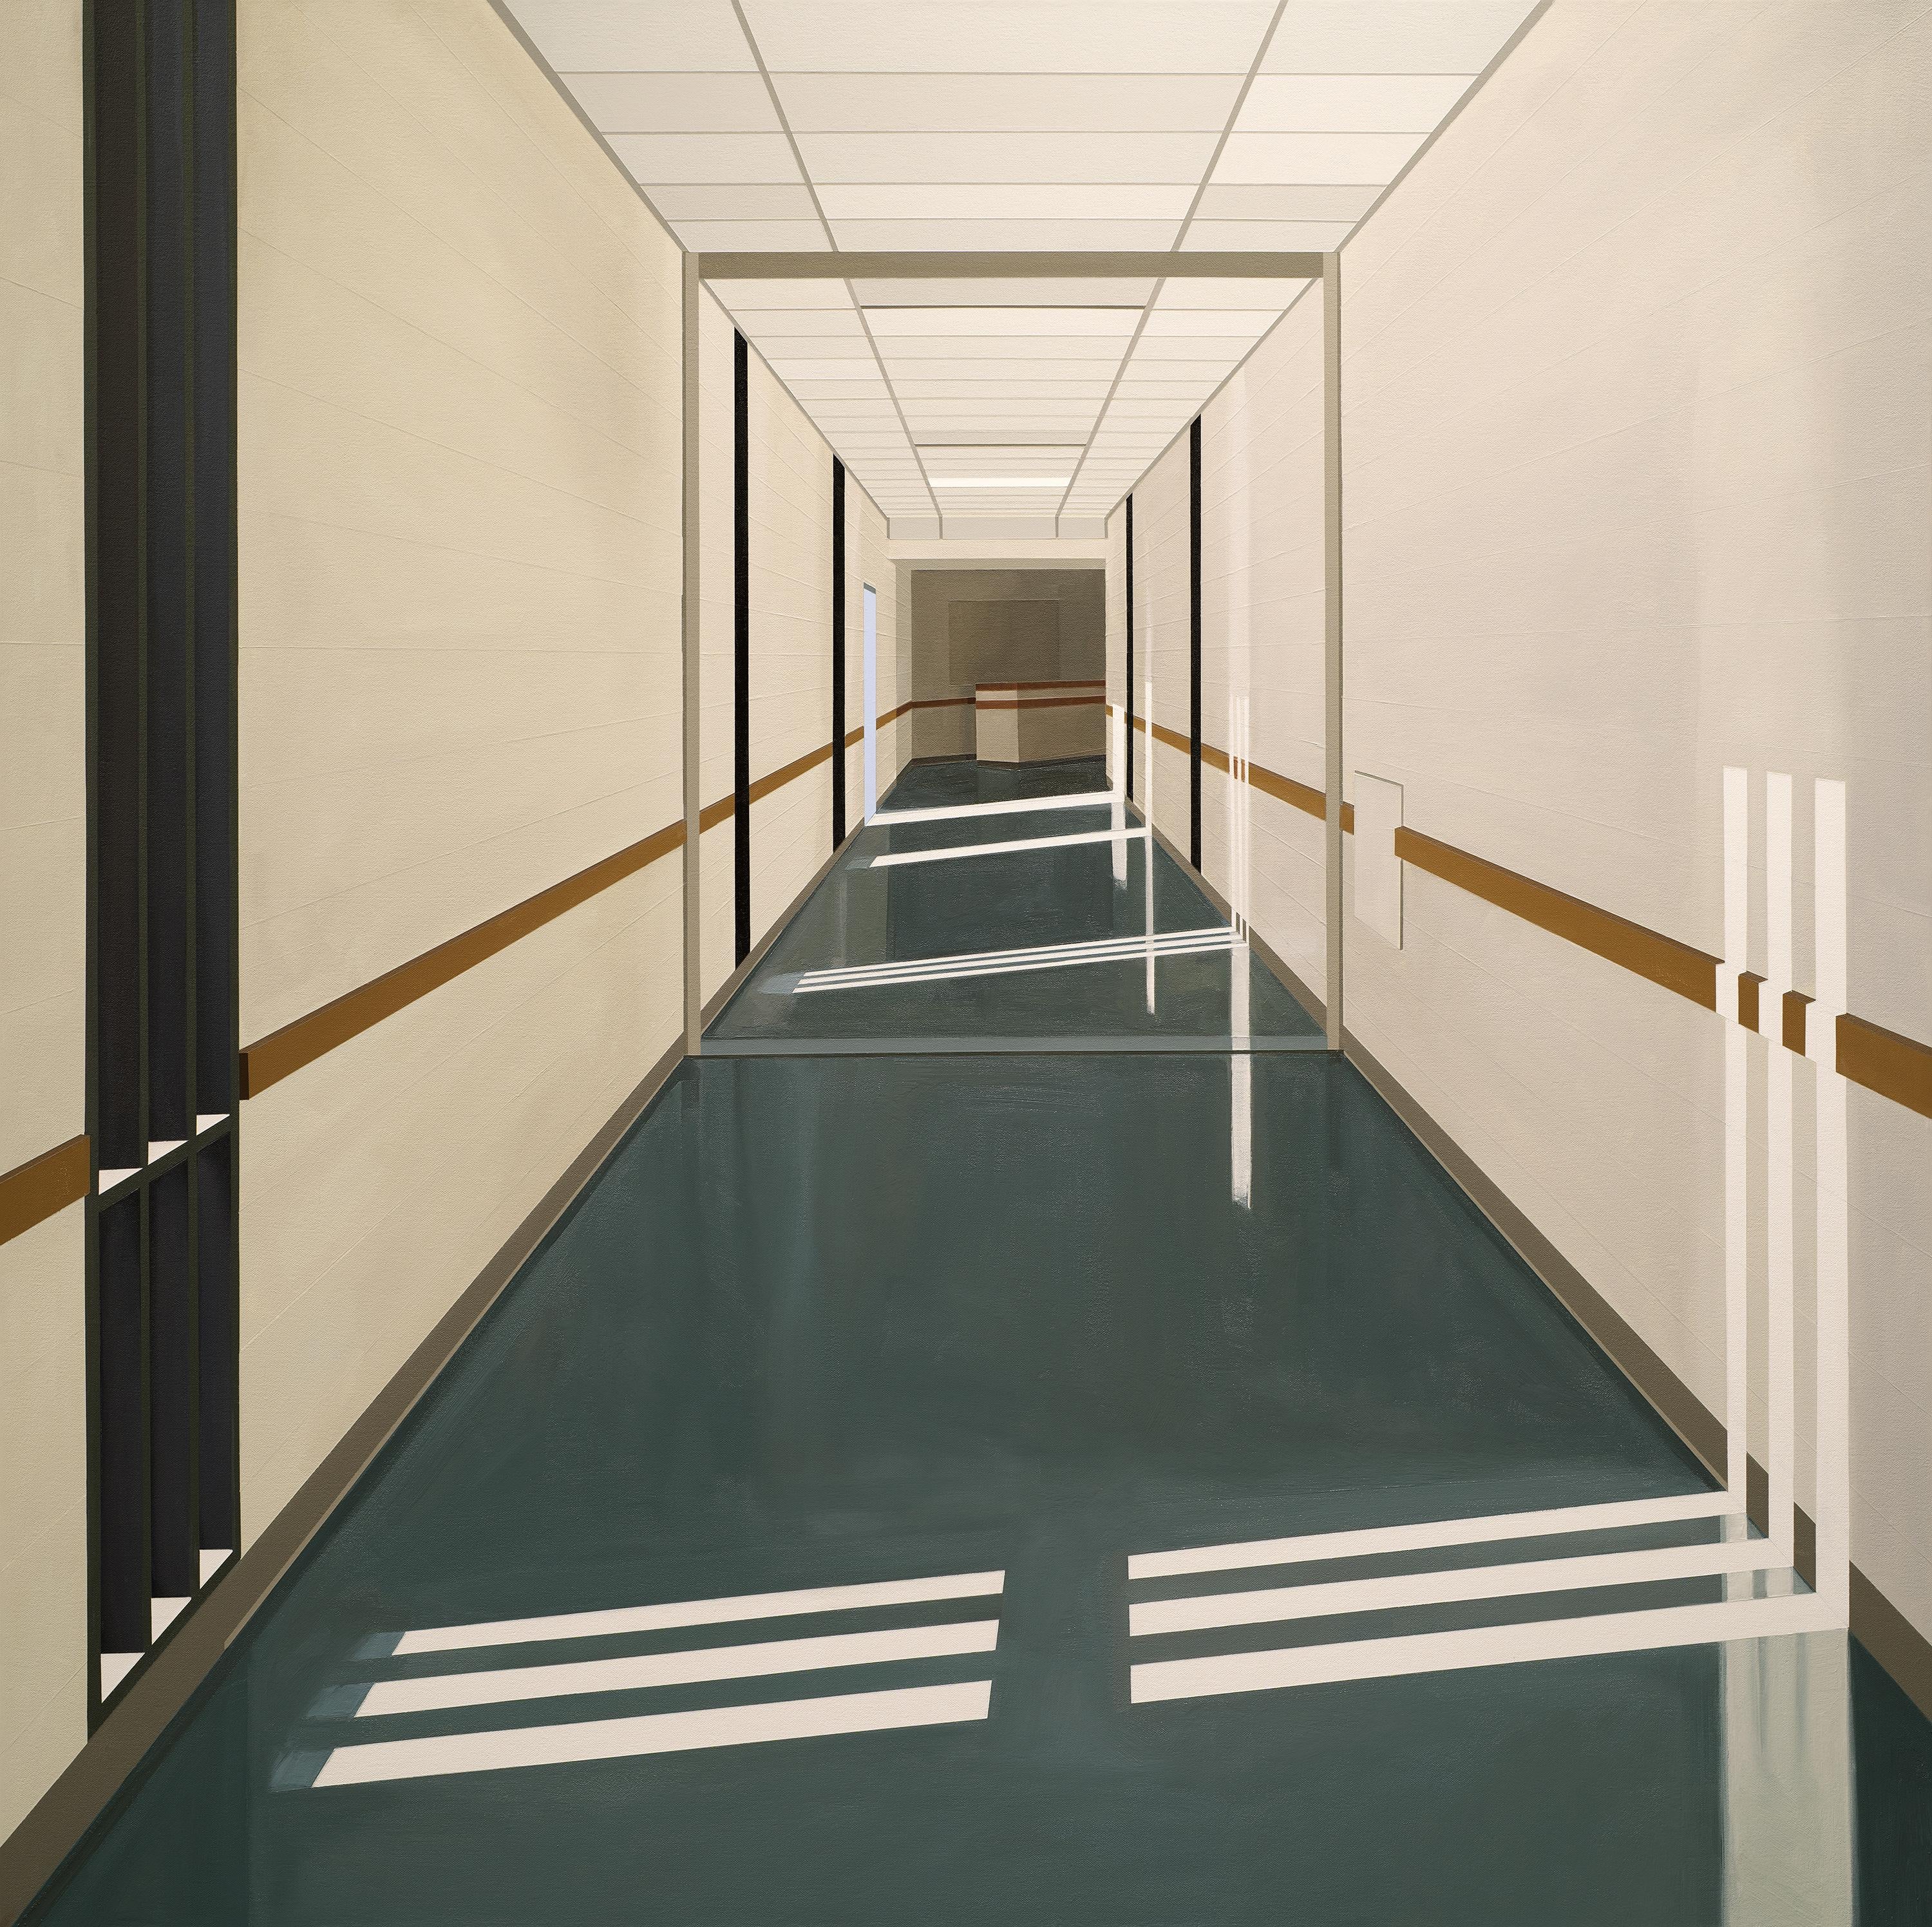 Corridor (Closed Facility, San Diego Youth Campus) - Painting by Sarah McKenzie